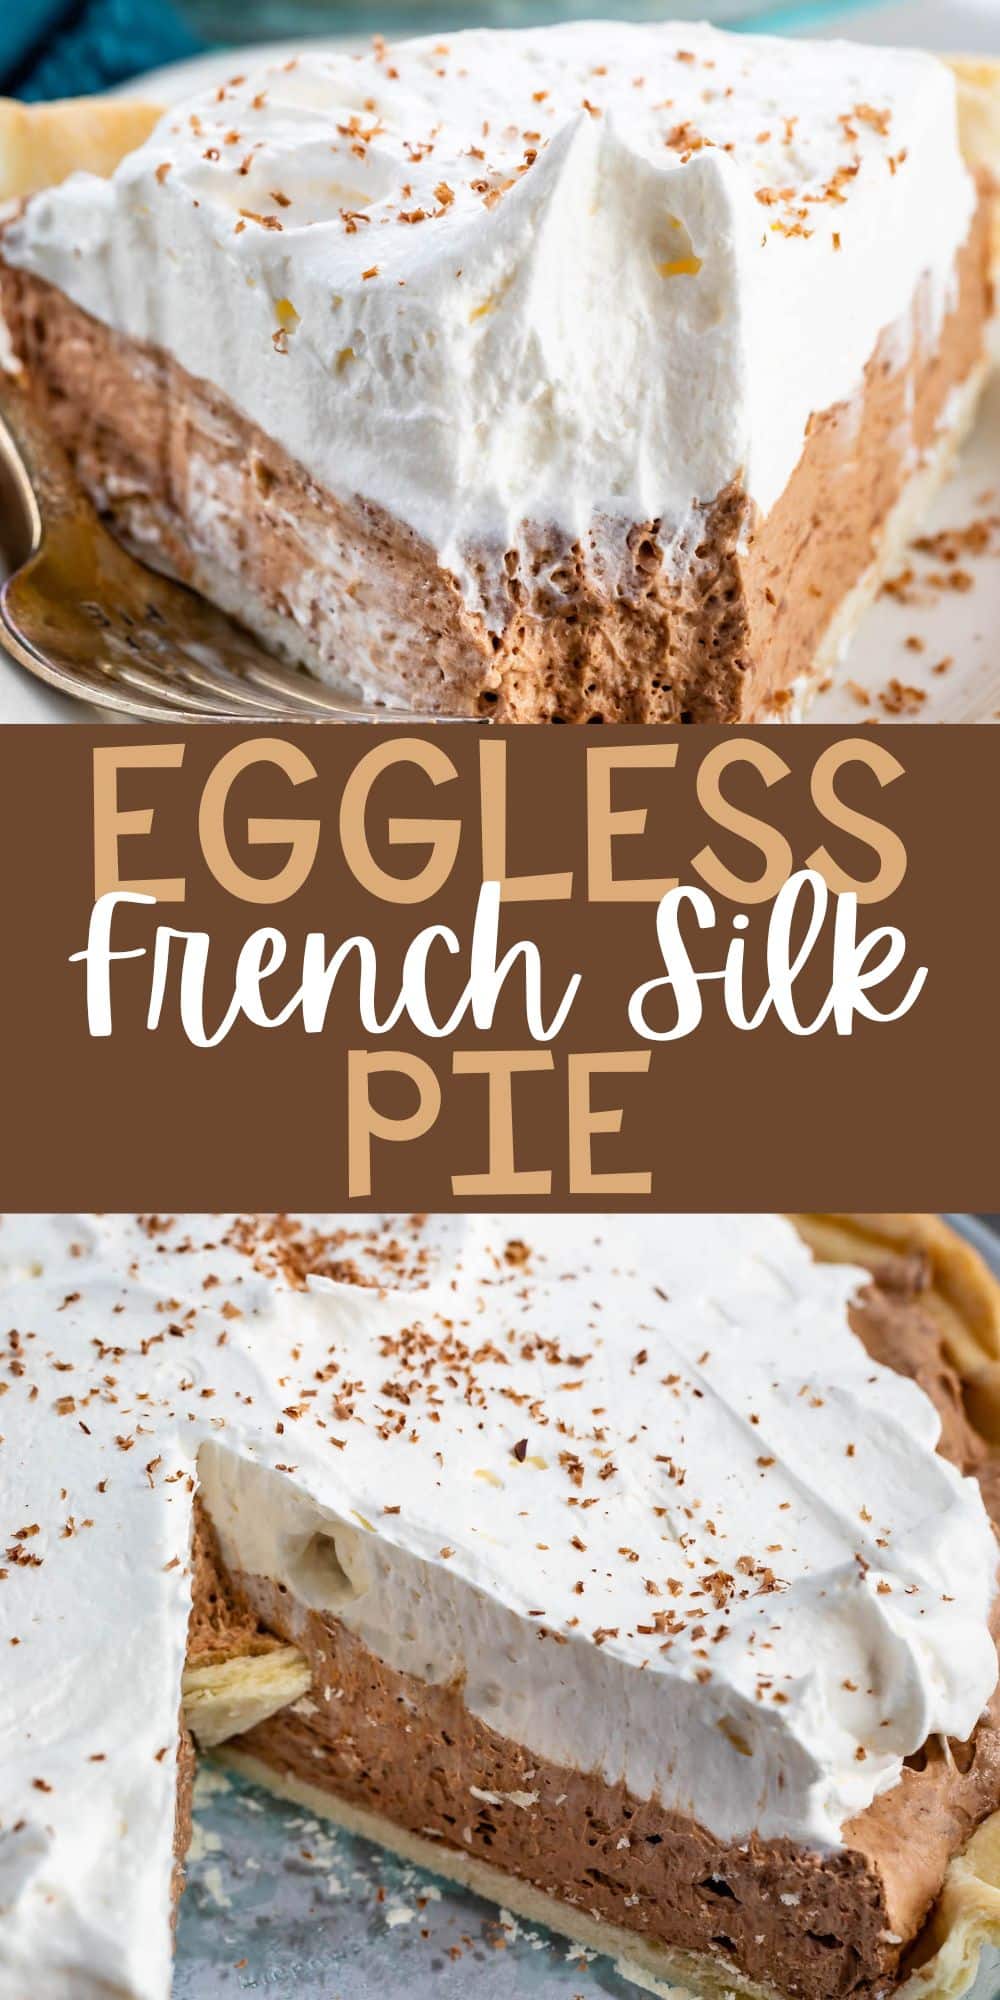 two photos of sliced French silk pie with one layer of chocolate and one layer of white with words on the image.